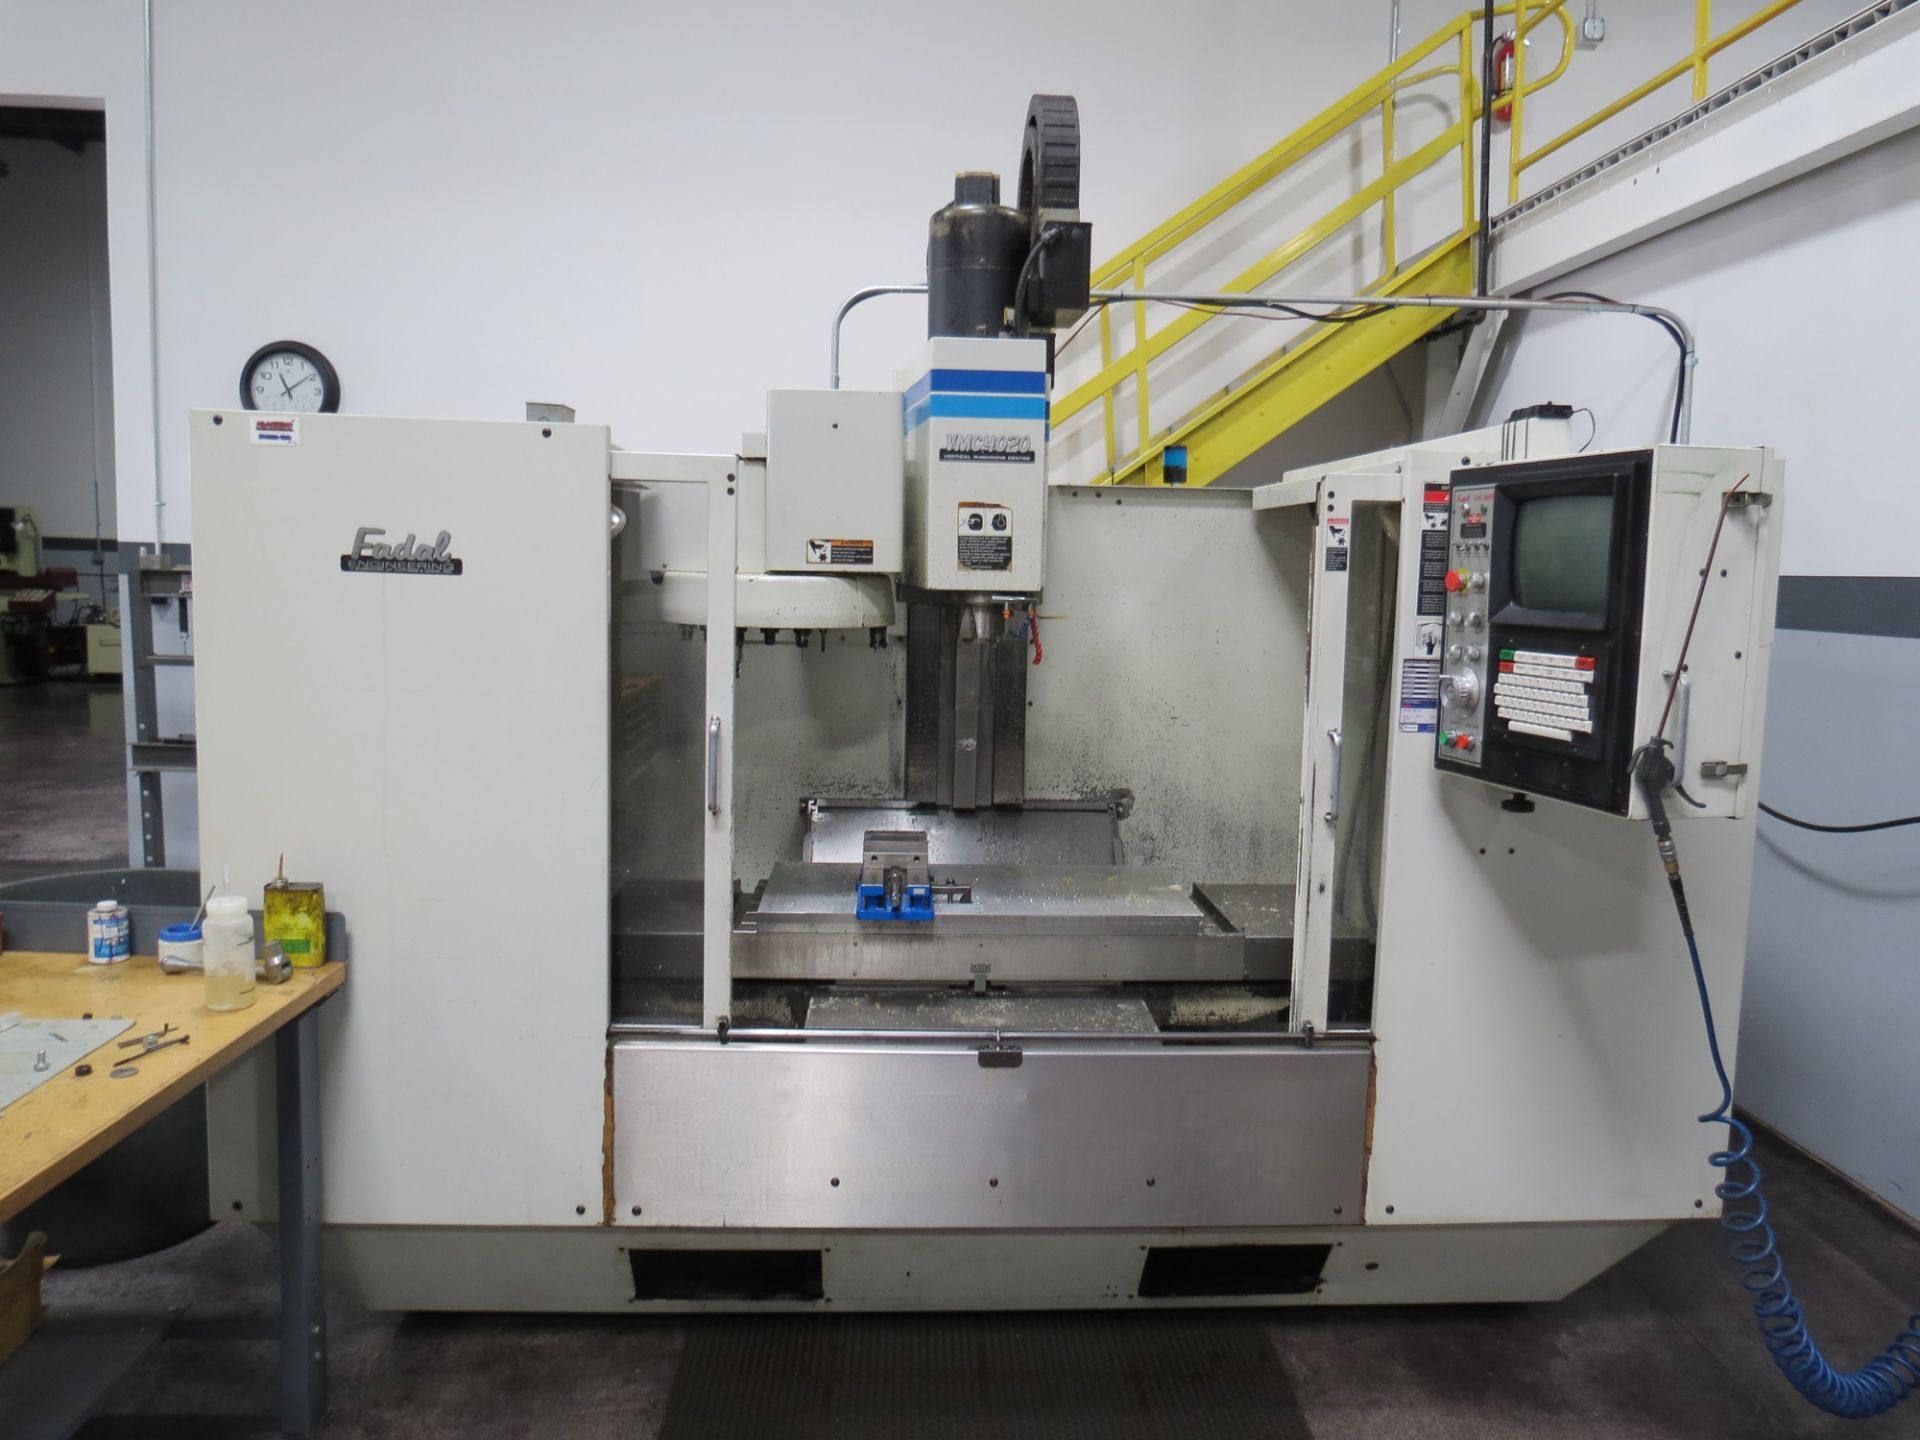 1998 FADAL MODEL: 906 VMC4020 VERTICAL MACHINING CENTER WITH FADAL CNC 88HS CONTROL, 230/440VAC, - Image 6 of 19